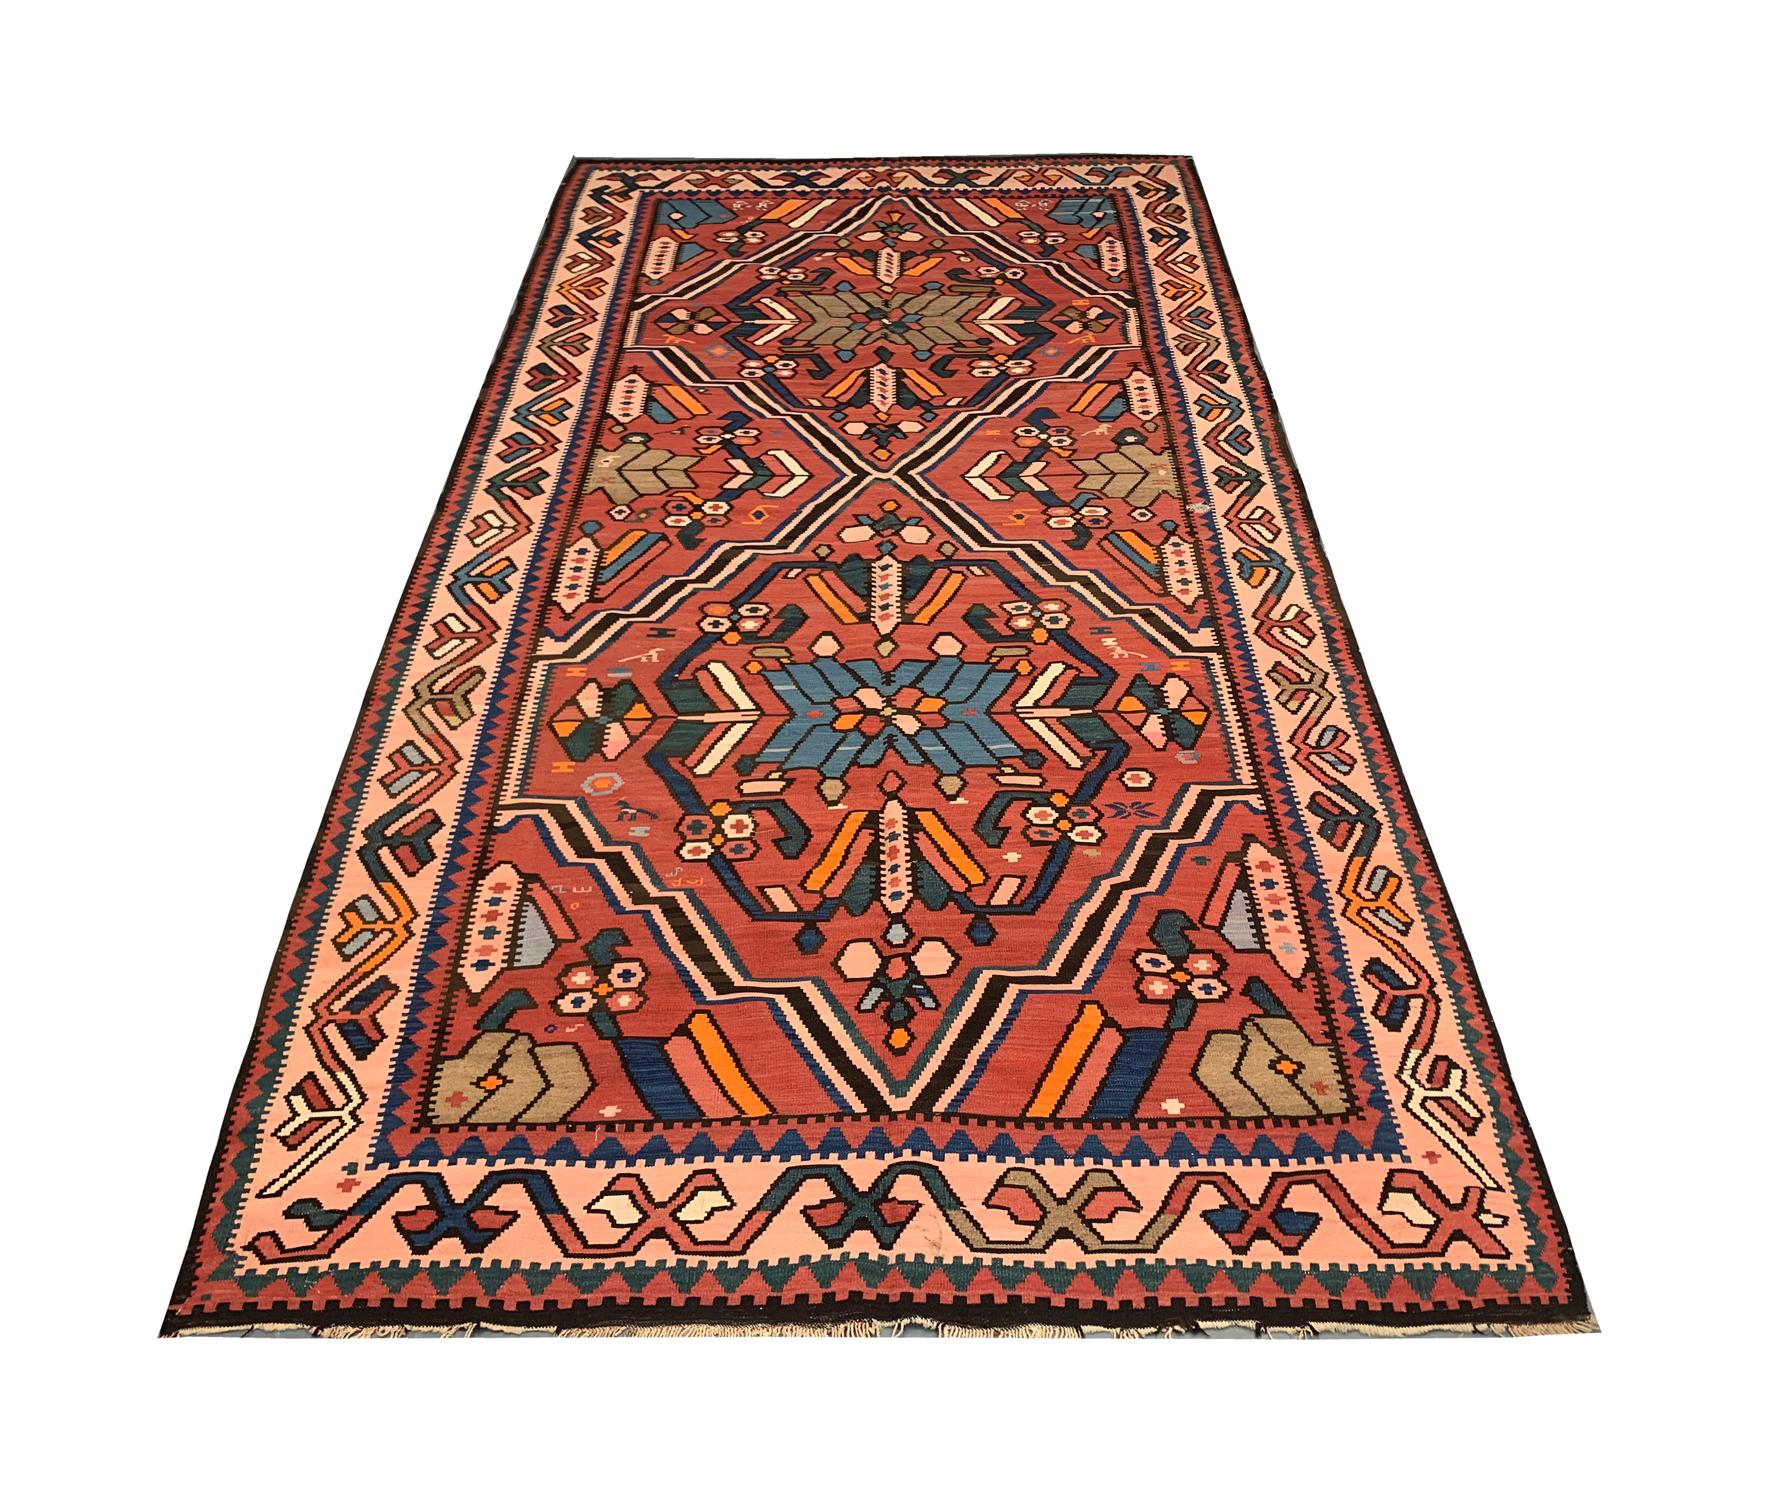 This handwoven antique Kilim was constructed in 1920 with fine hand-spun wool. The design features a double medallion in the centre and a detailed surround with smaller motifs and a repeat pattern border. The pattern is woven on a rust-red